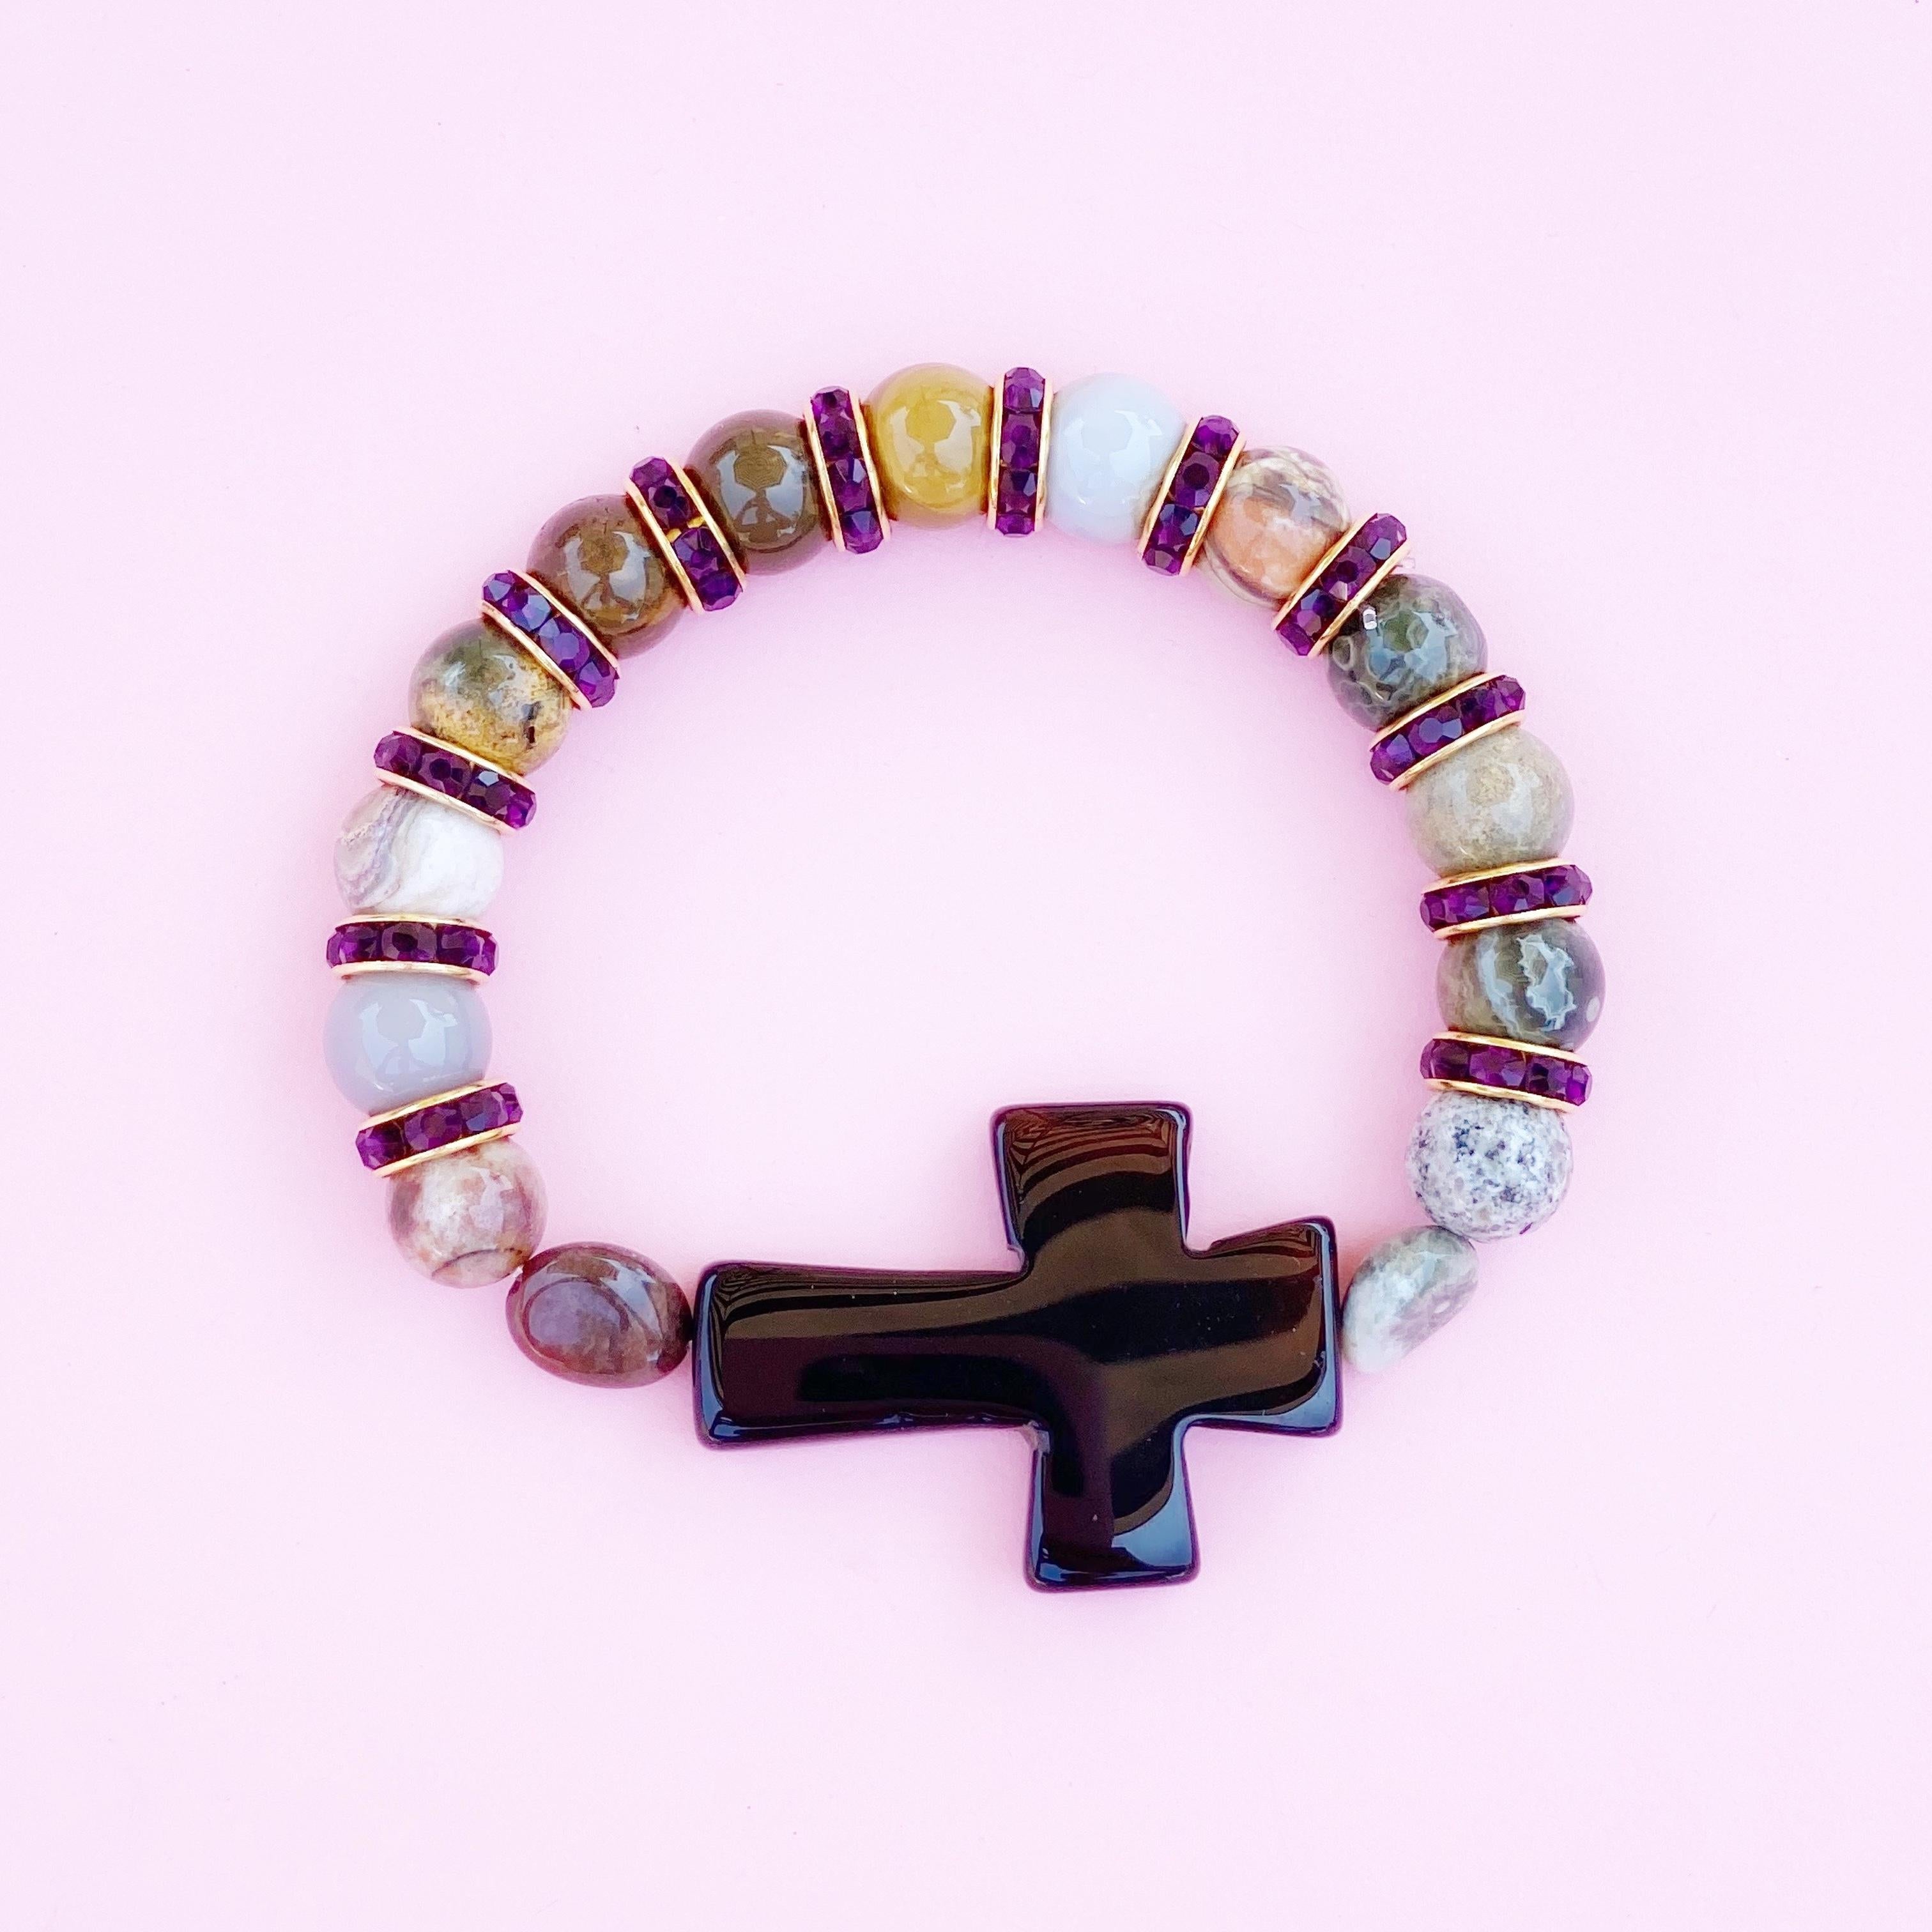 10mm polished Ocean Jasper gemstones with black Onyx gemstone cross flanked by Amethyst-colored crystal rhinestones and gold-plated accents. 

Stretchy elastic band, one size fits most.

Due to the uniqueness of natural gemstones, each stone will